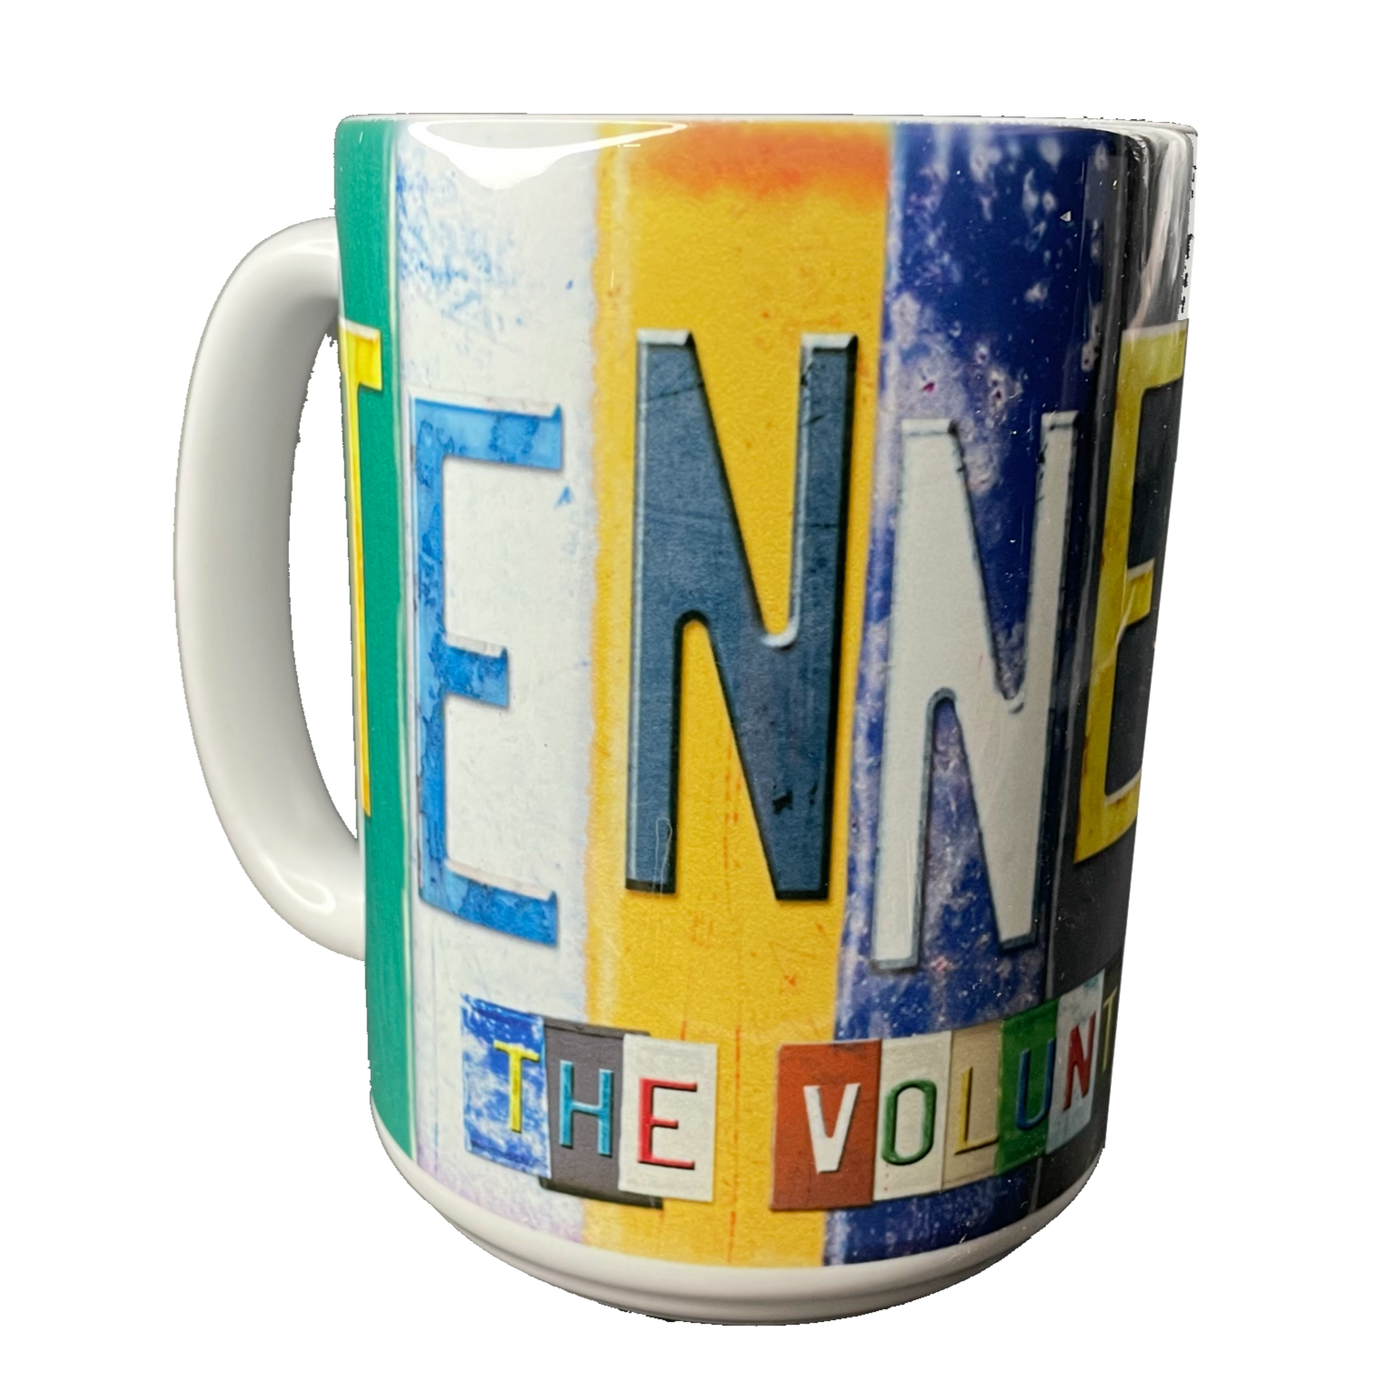 Enjoy your favorite coffee in this Tennessee coffee mug! White ceramic coffee mug with license plate letters spelling out "TENNESSEE".  Available online or in our shop just outside Nashville in Smyrna, TN. 